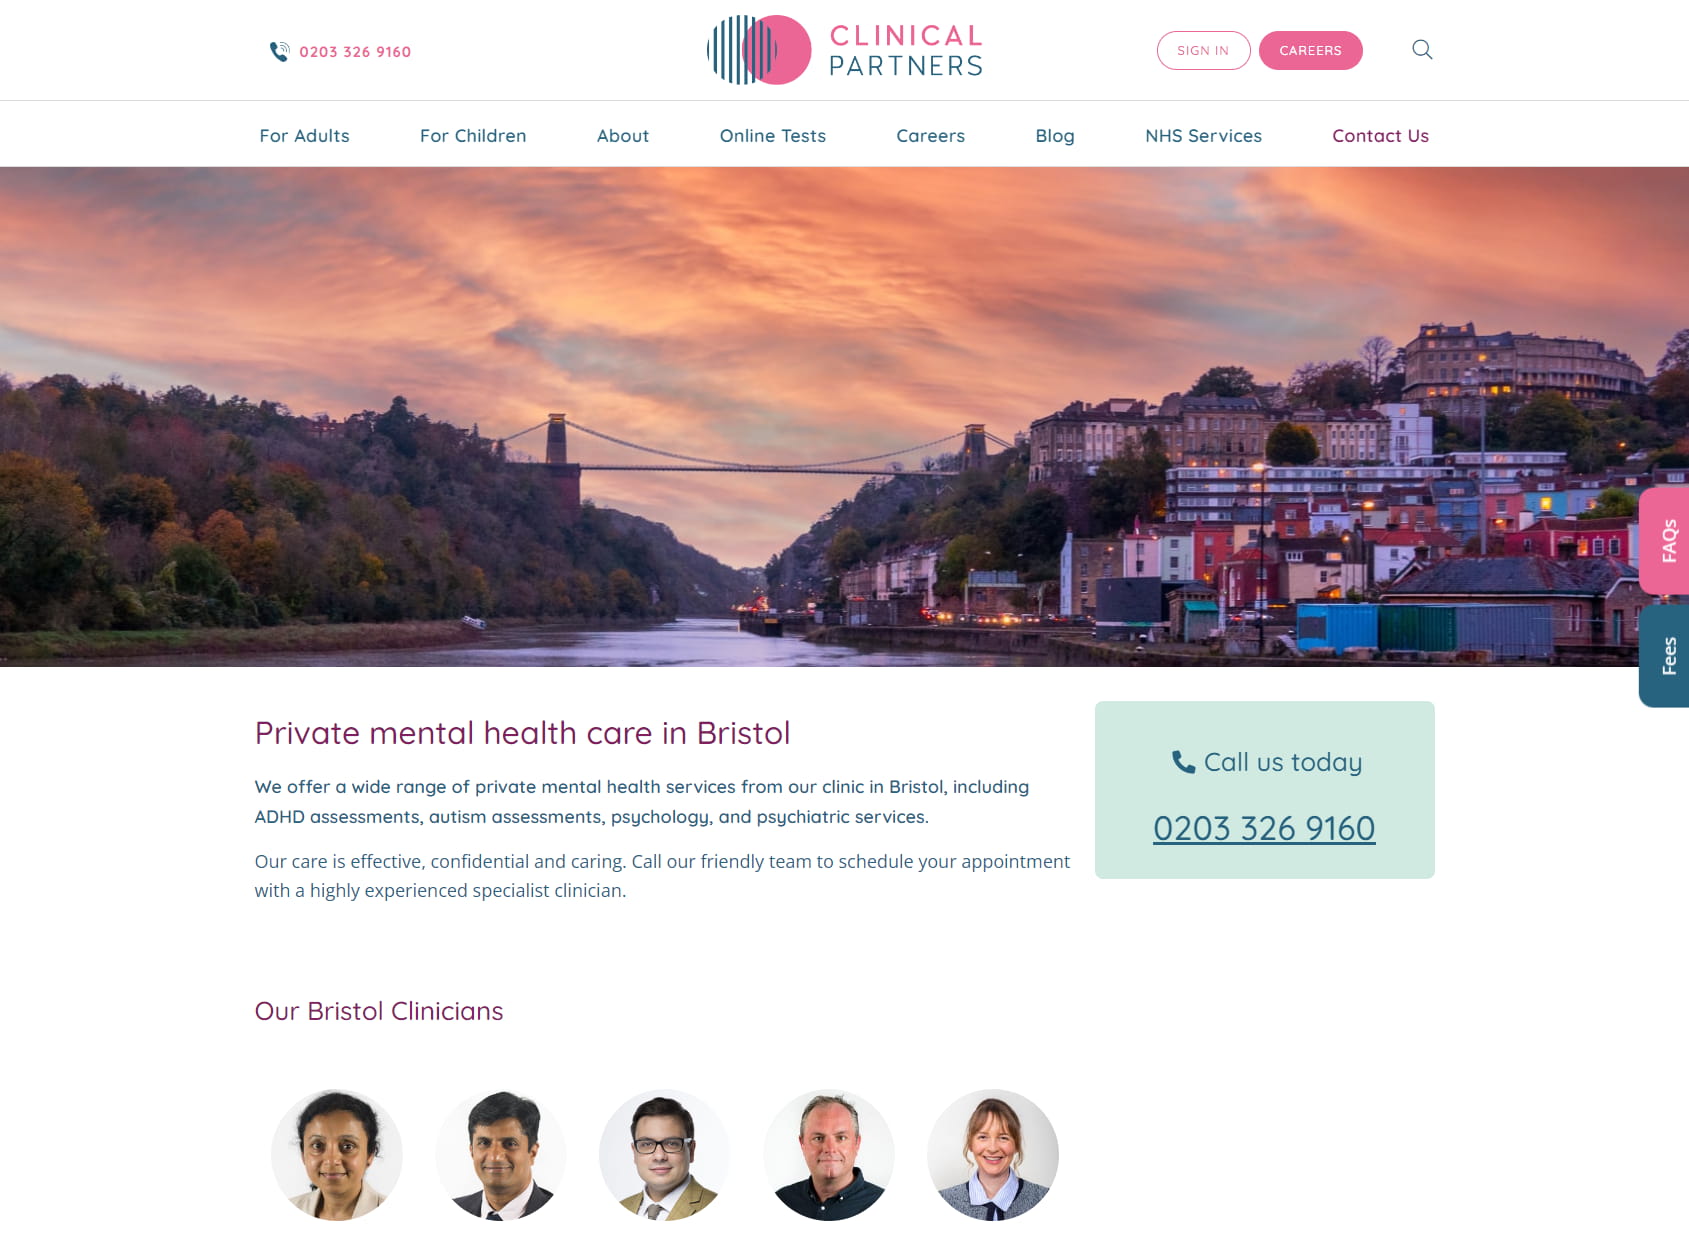 Clinical Partners Bristol Clinic